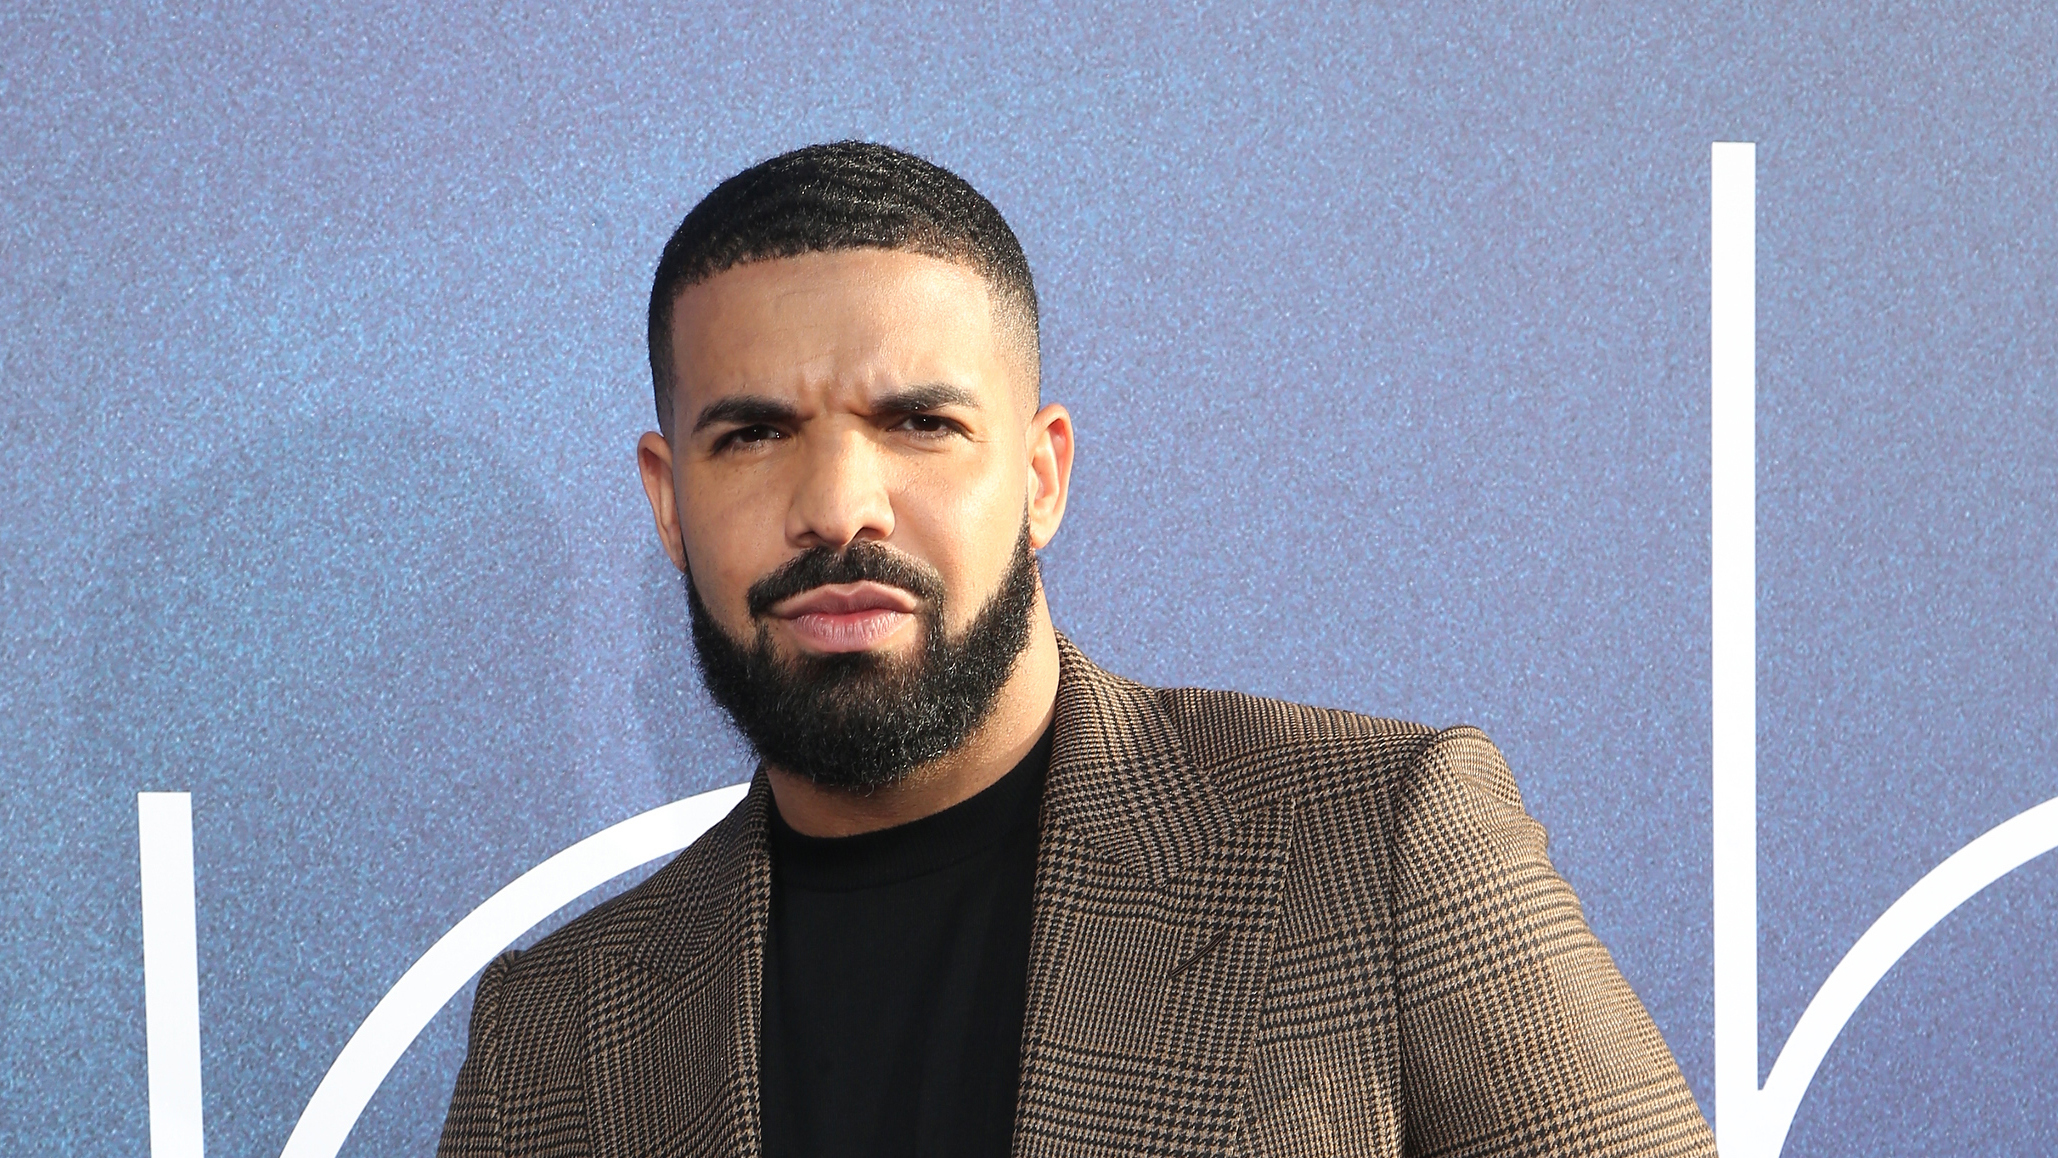 Who was Drake’s ghostwriter?